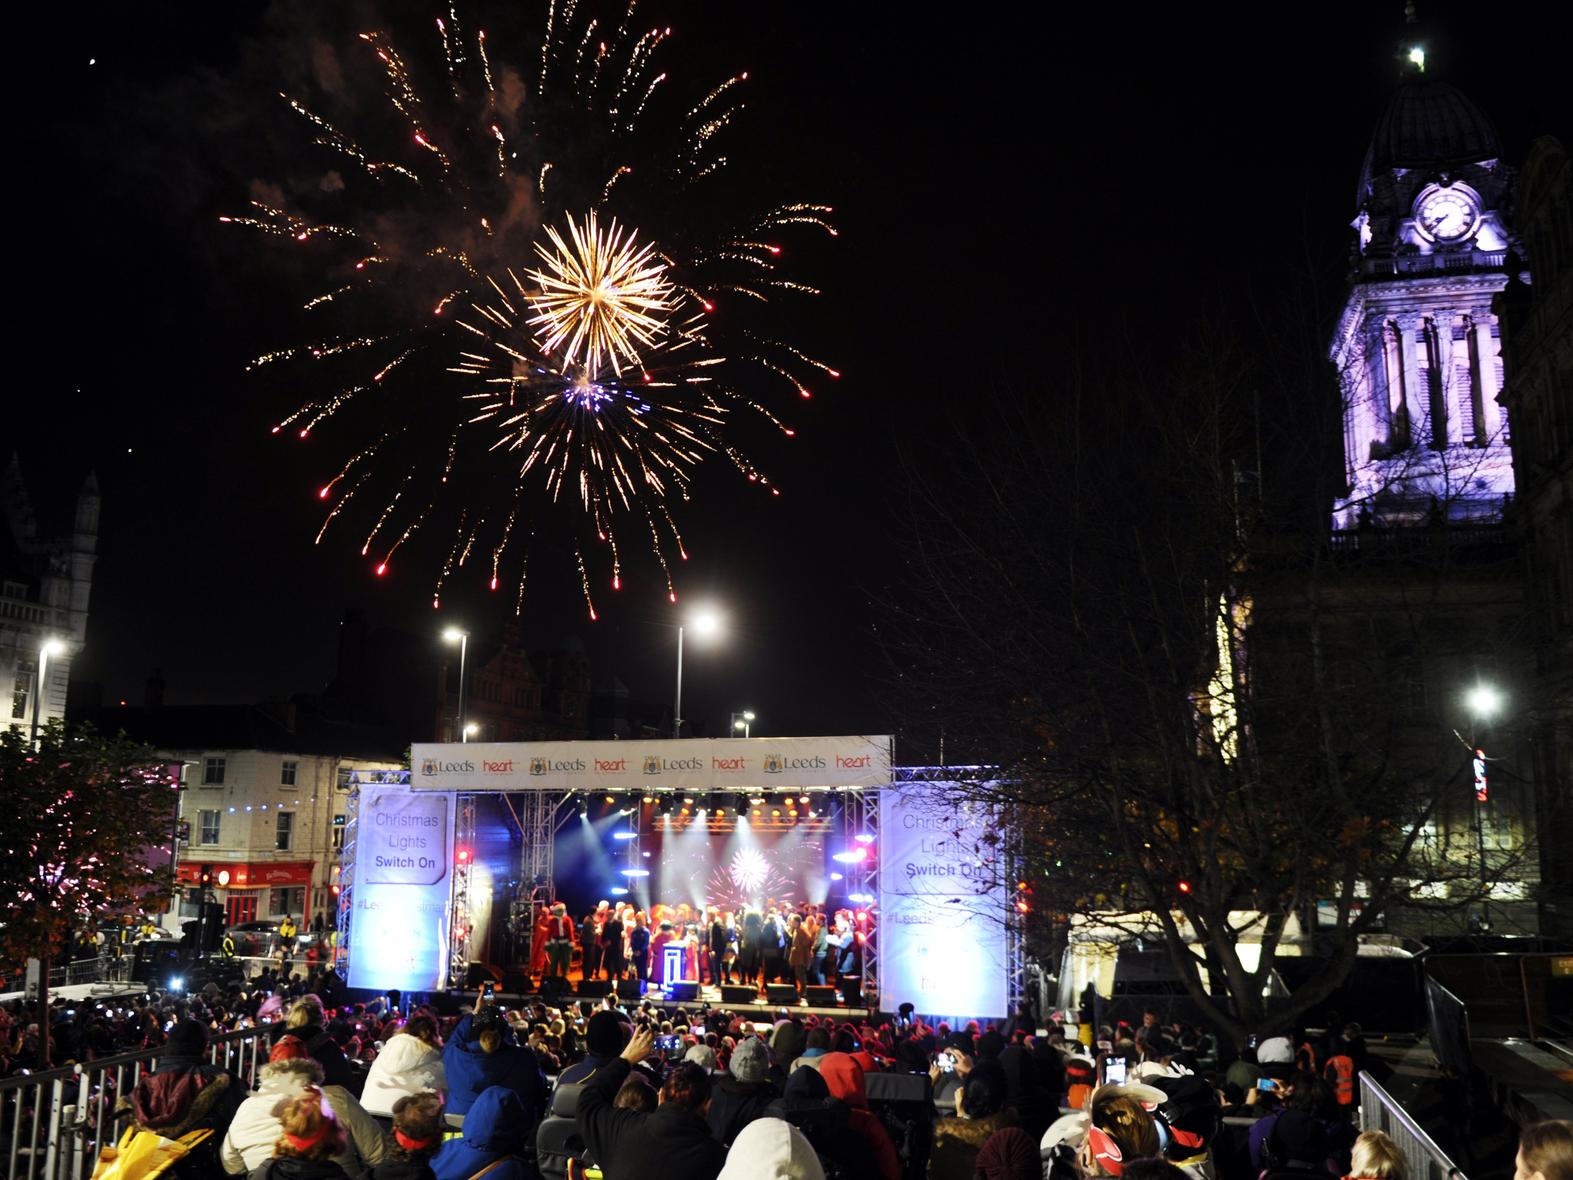 On November 7, the city centre lights will be switched on during a huge event which is expected to draw an audience of thousands. The line up and event time is yet to be announced.